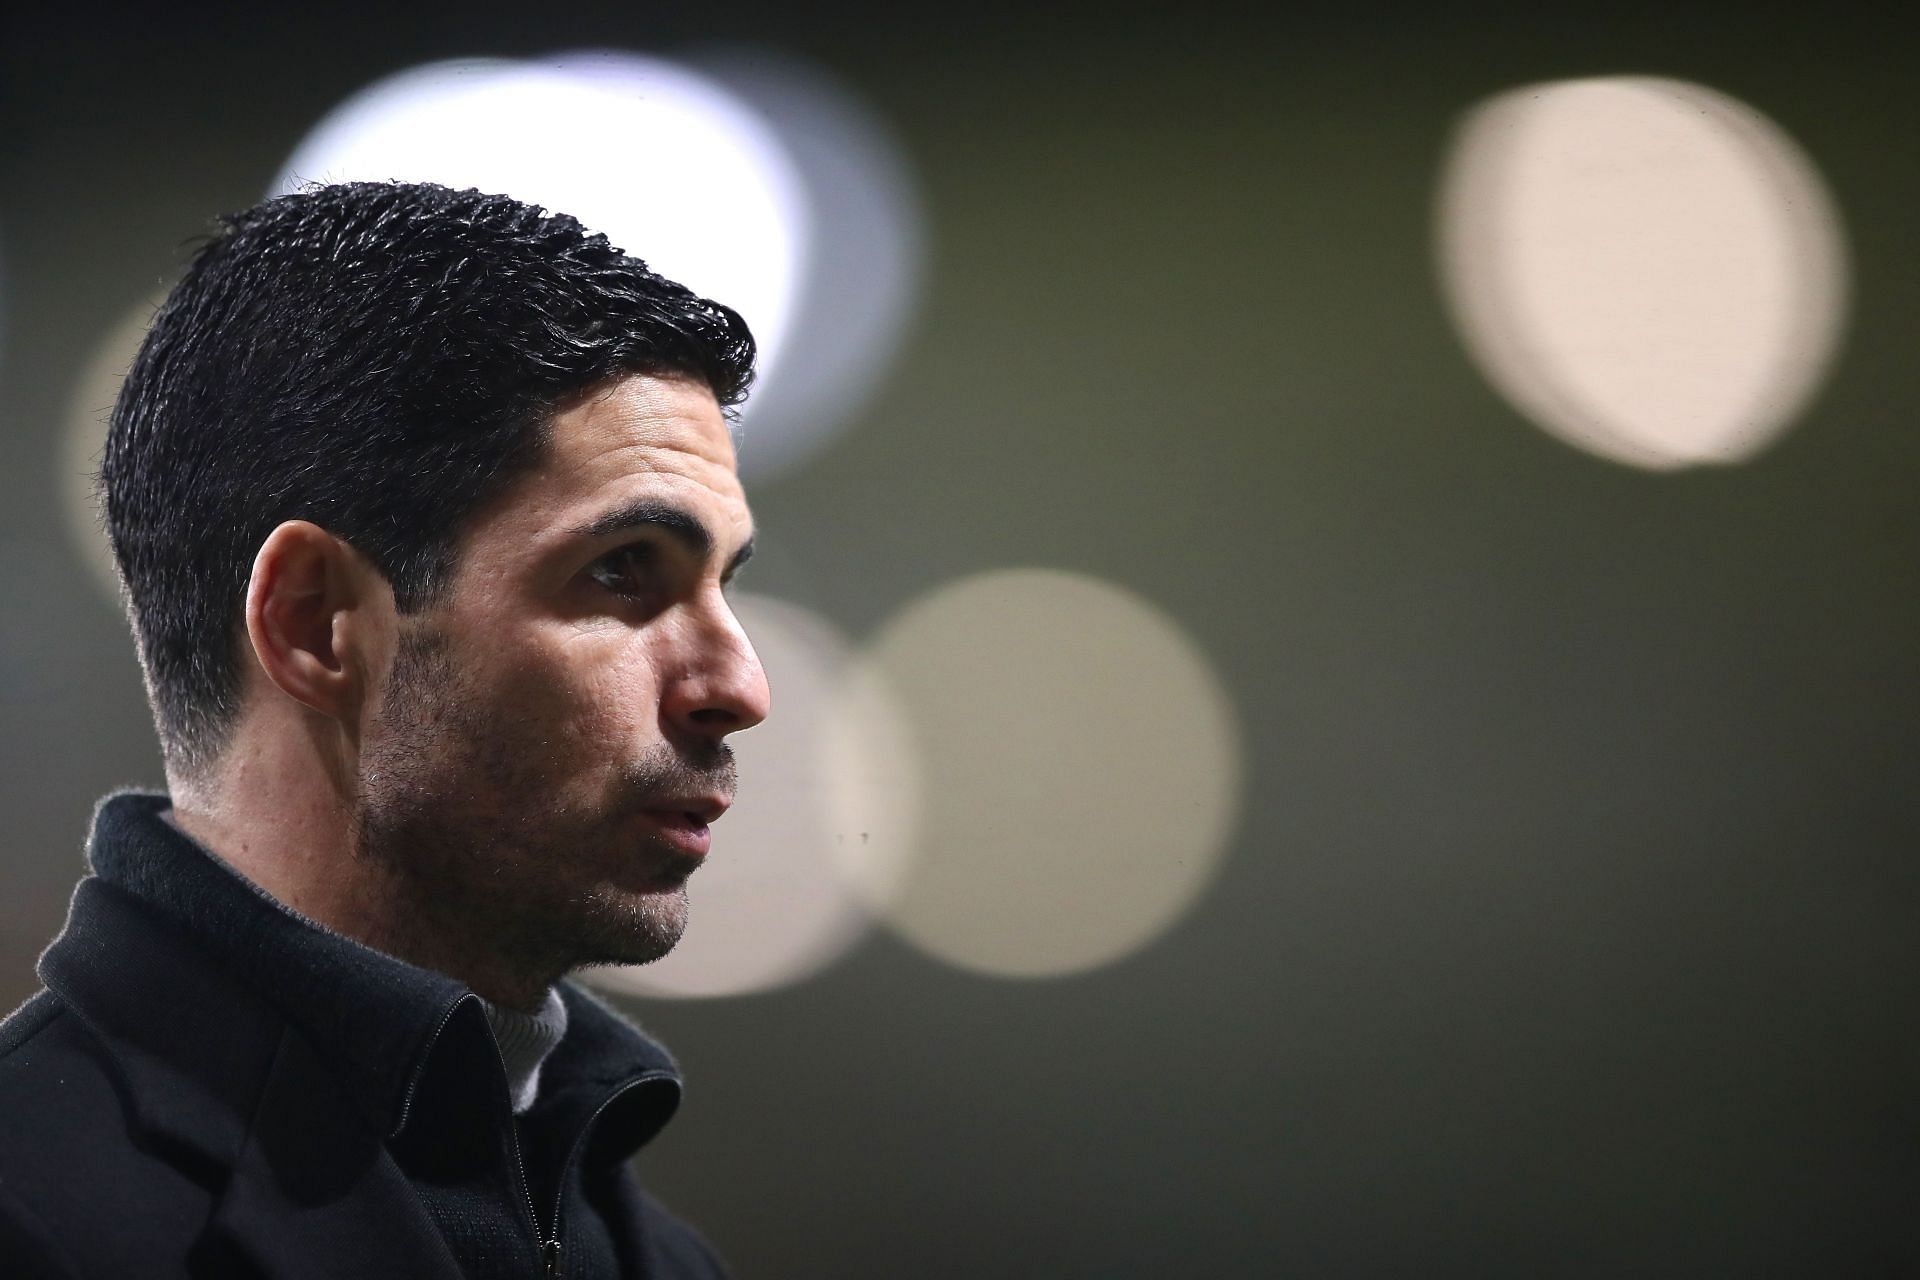 Arsenal manager Mikel Arteta has taken The Gunners to fifth in the Premier League.